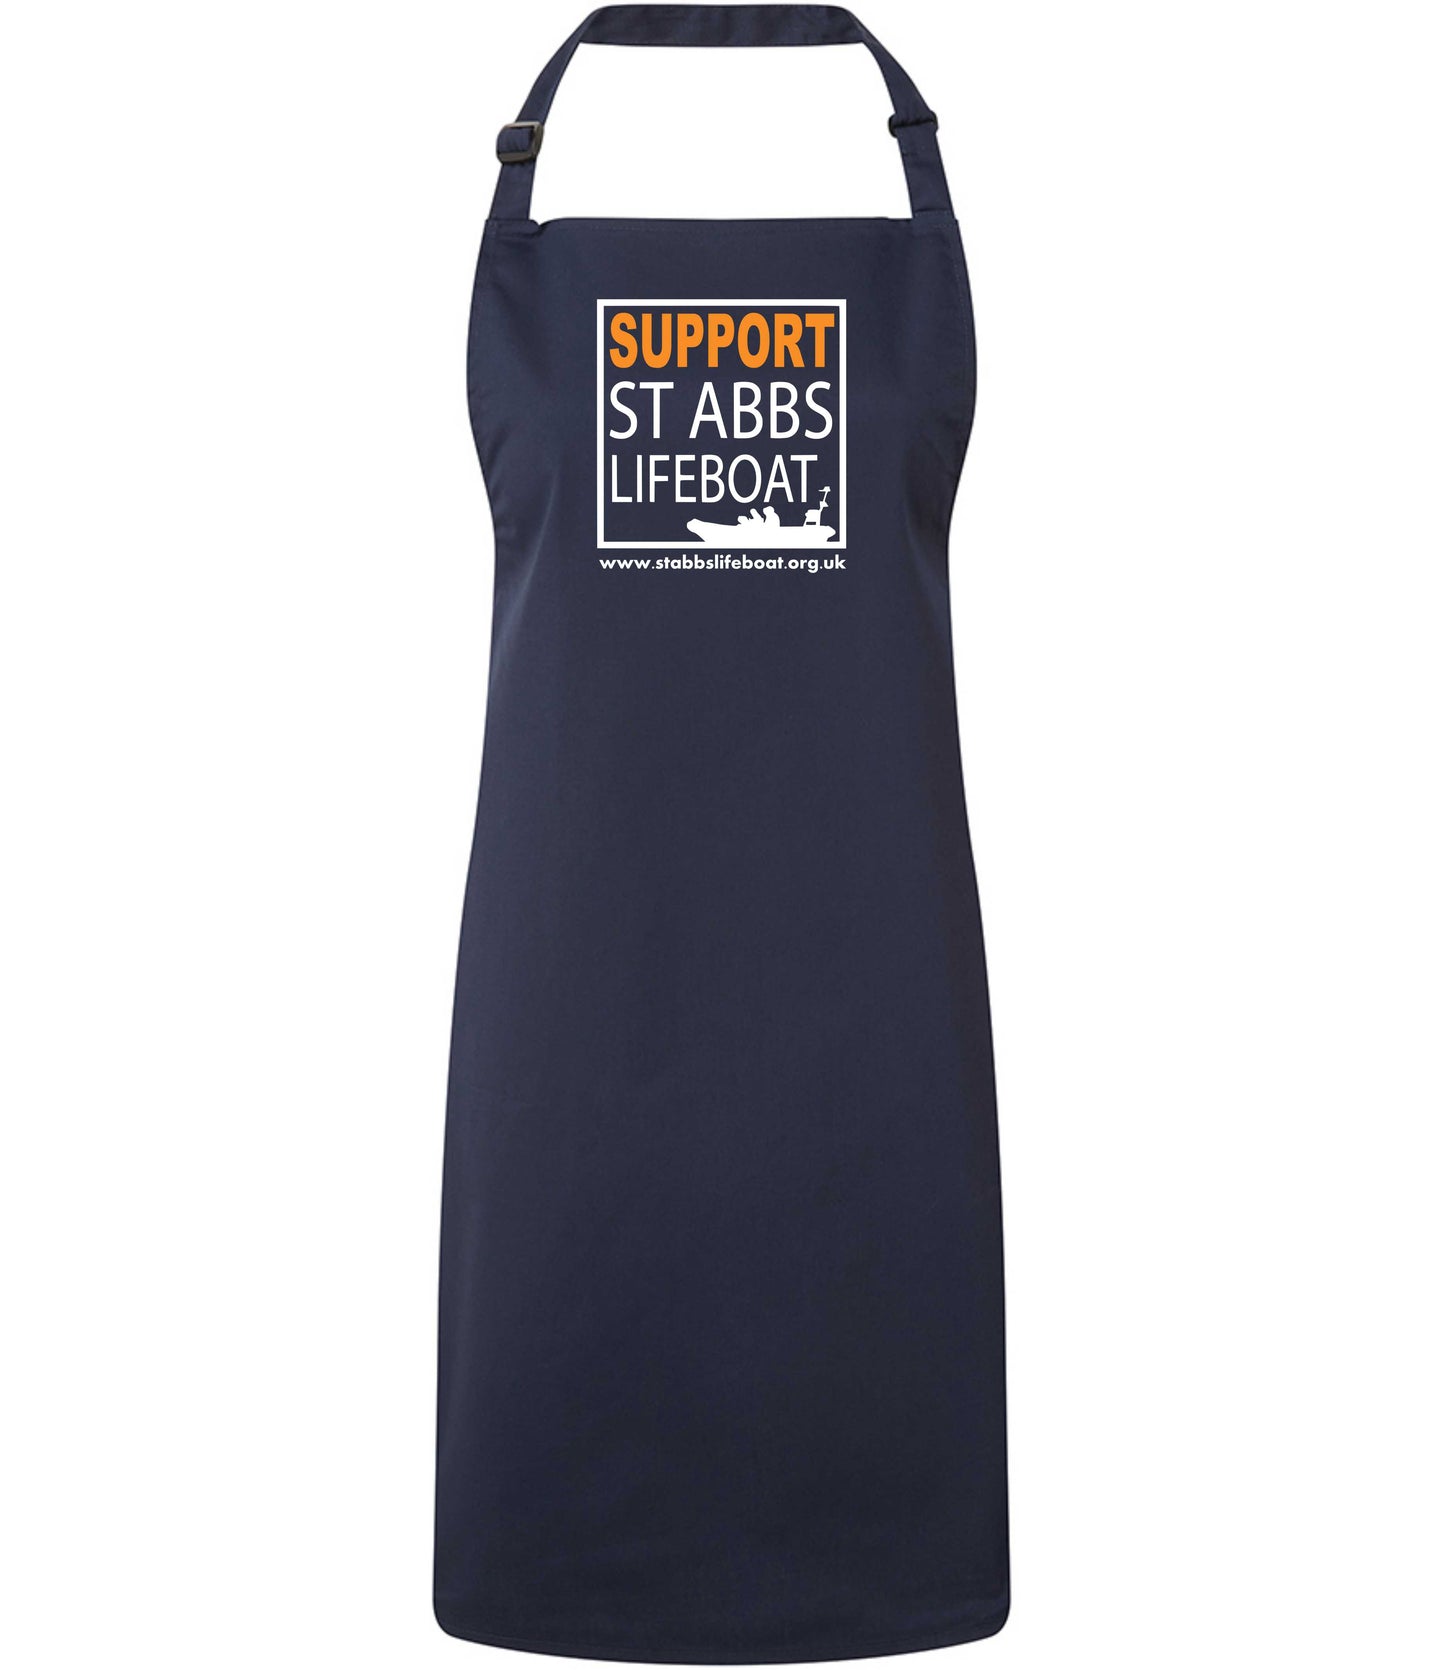 St Abbs Lifeboat Apron